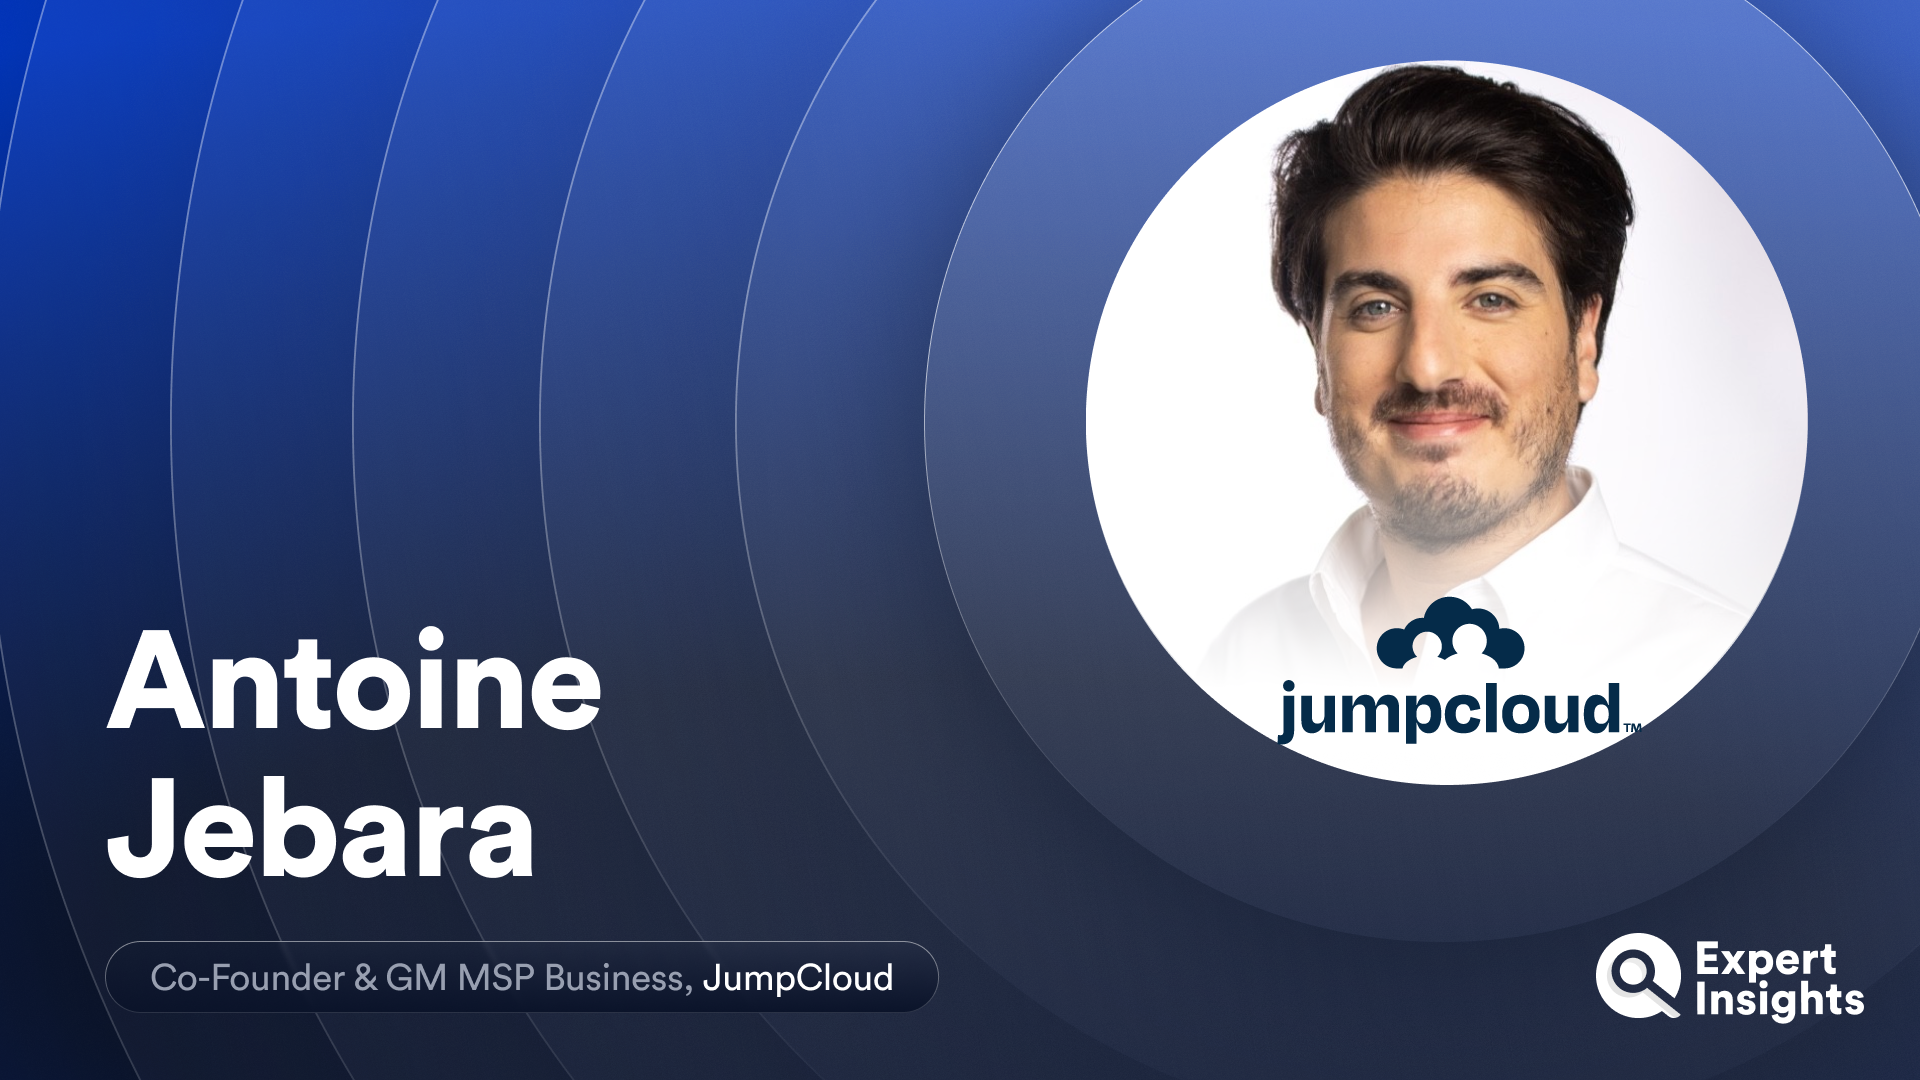 Expert Insights interviews Antoine Jebara, Co-Founder & GM MSP Business at JumpCloud.